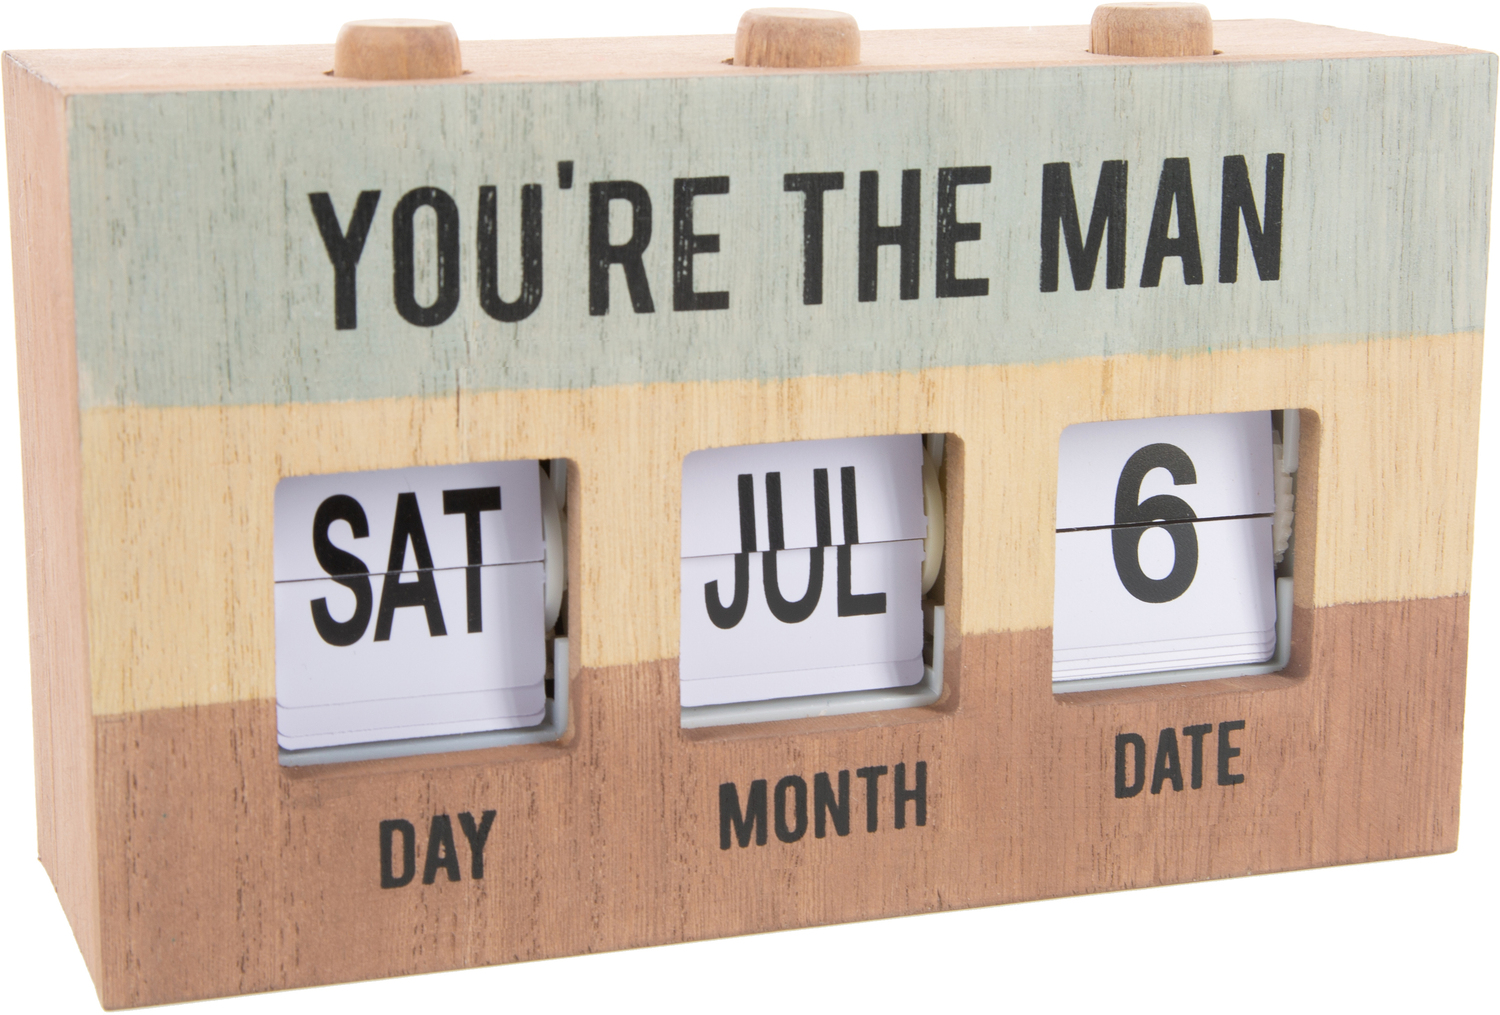 You're the Man by Man Made - You're the Man - Perpetual Desk Calendar